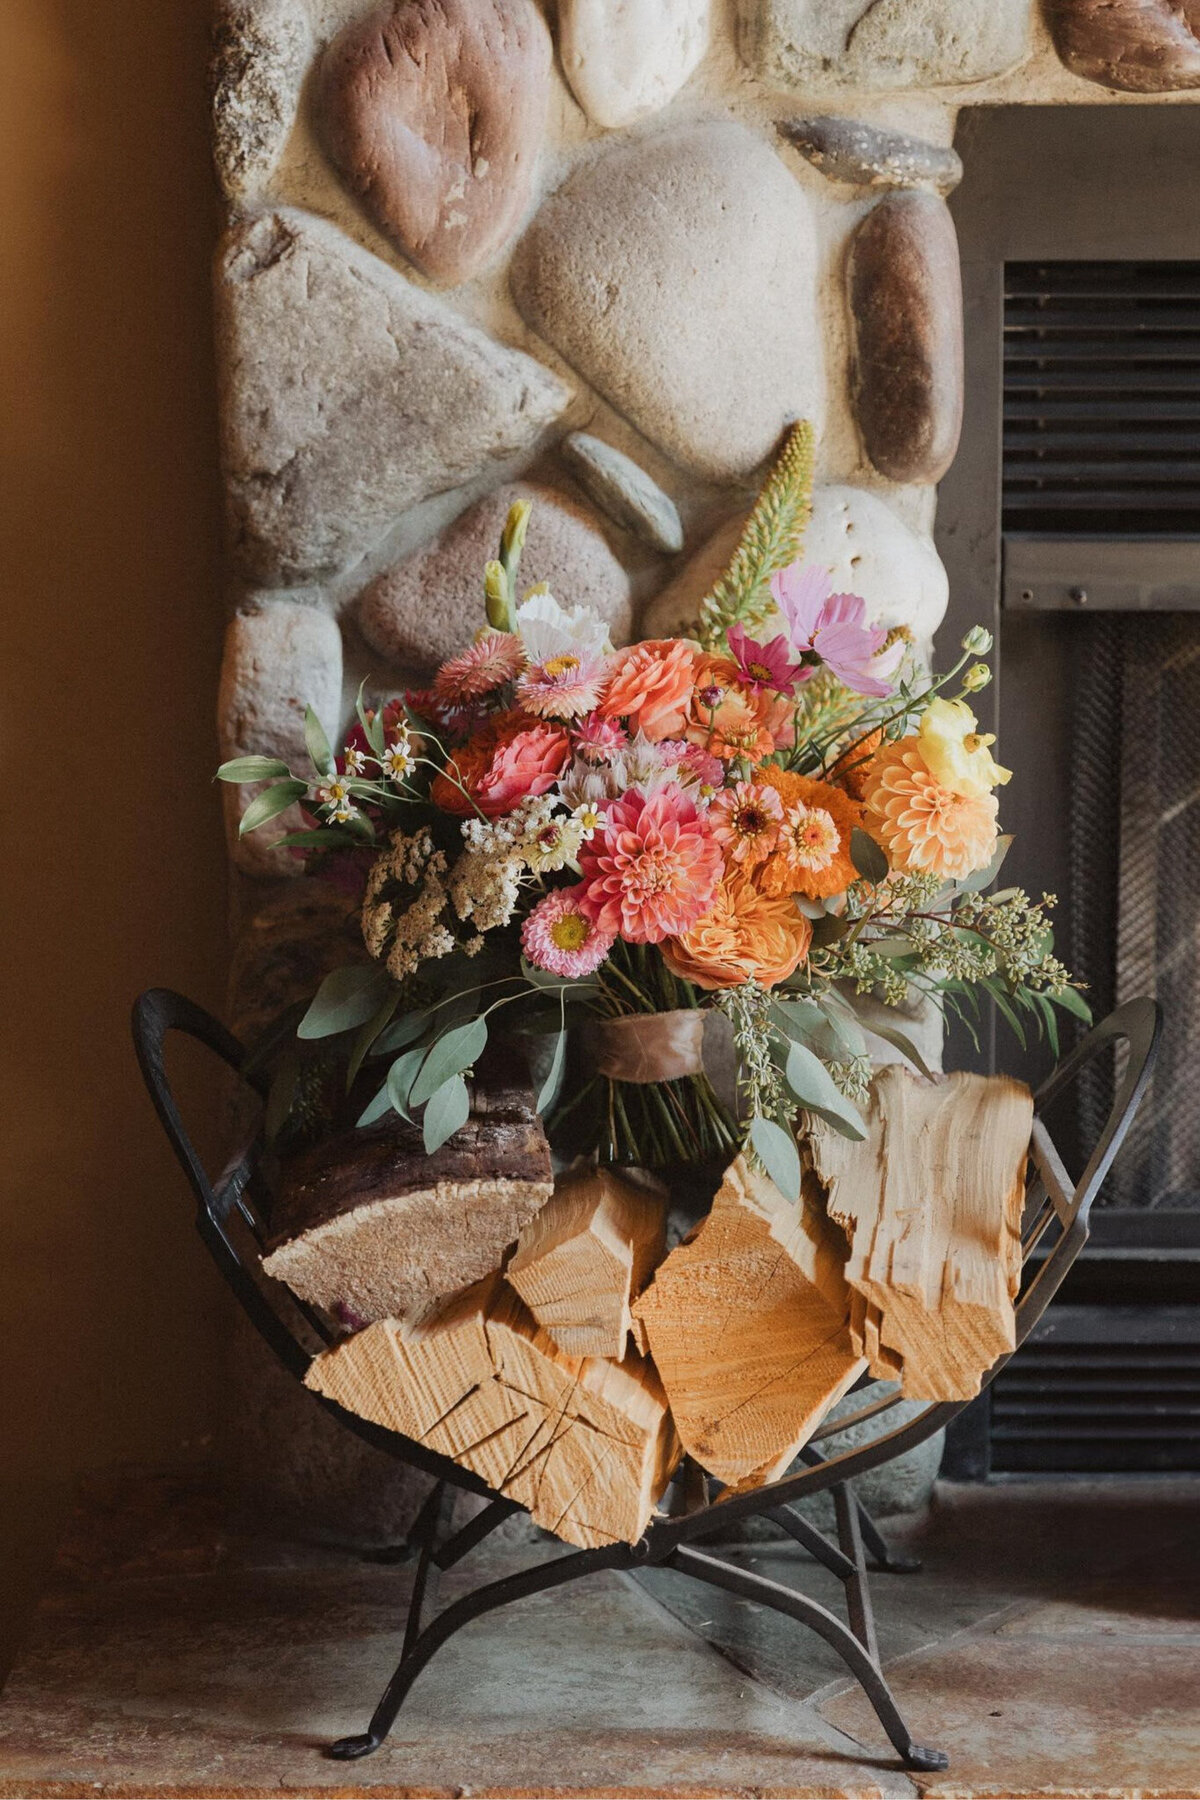 Colourful and bold Spring inspired florals by Moonlight Flowers, trendy and lush floral shop located in Sparwood, BC featured on the Brontë Bride Vendor Guide.